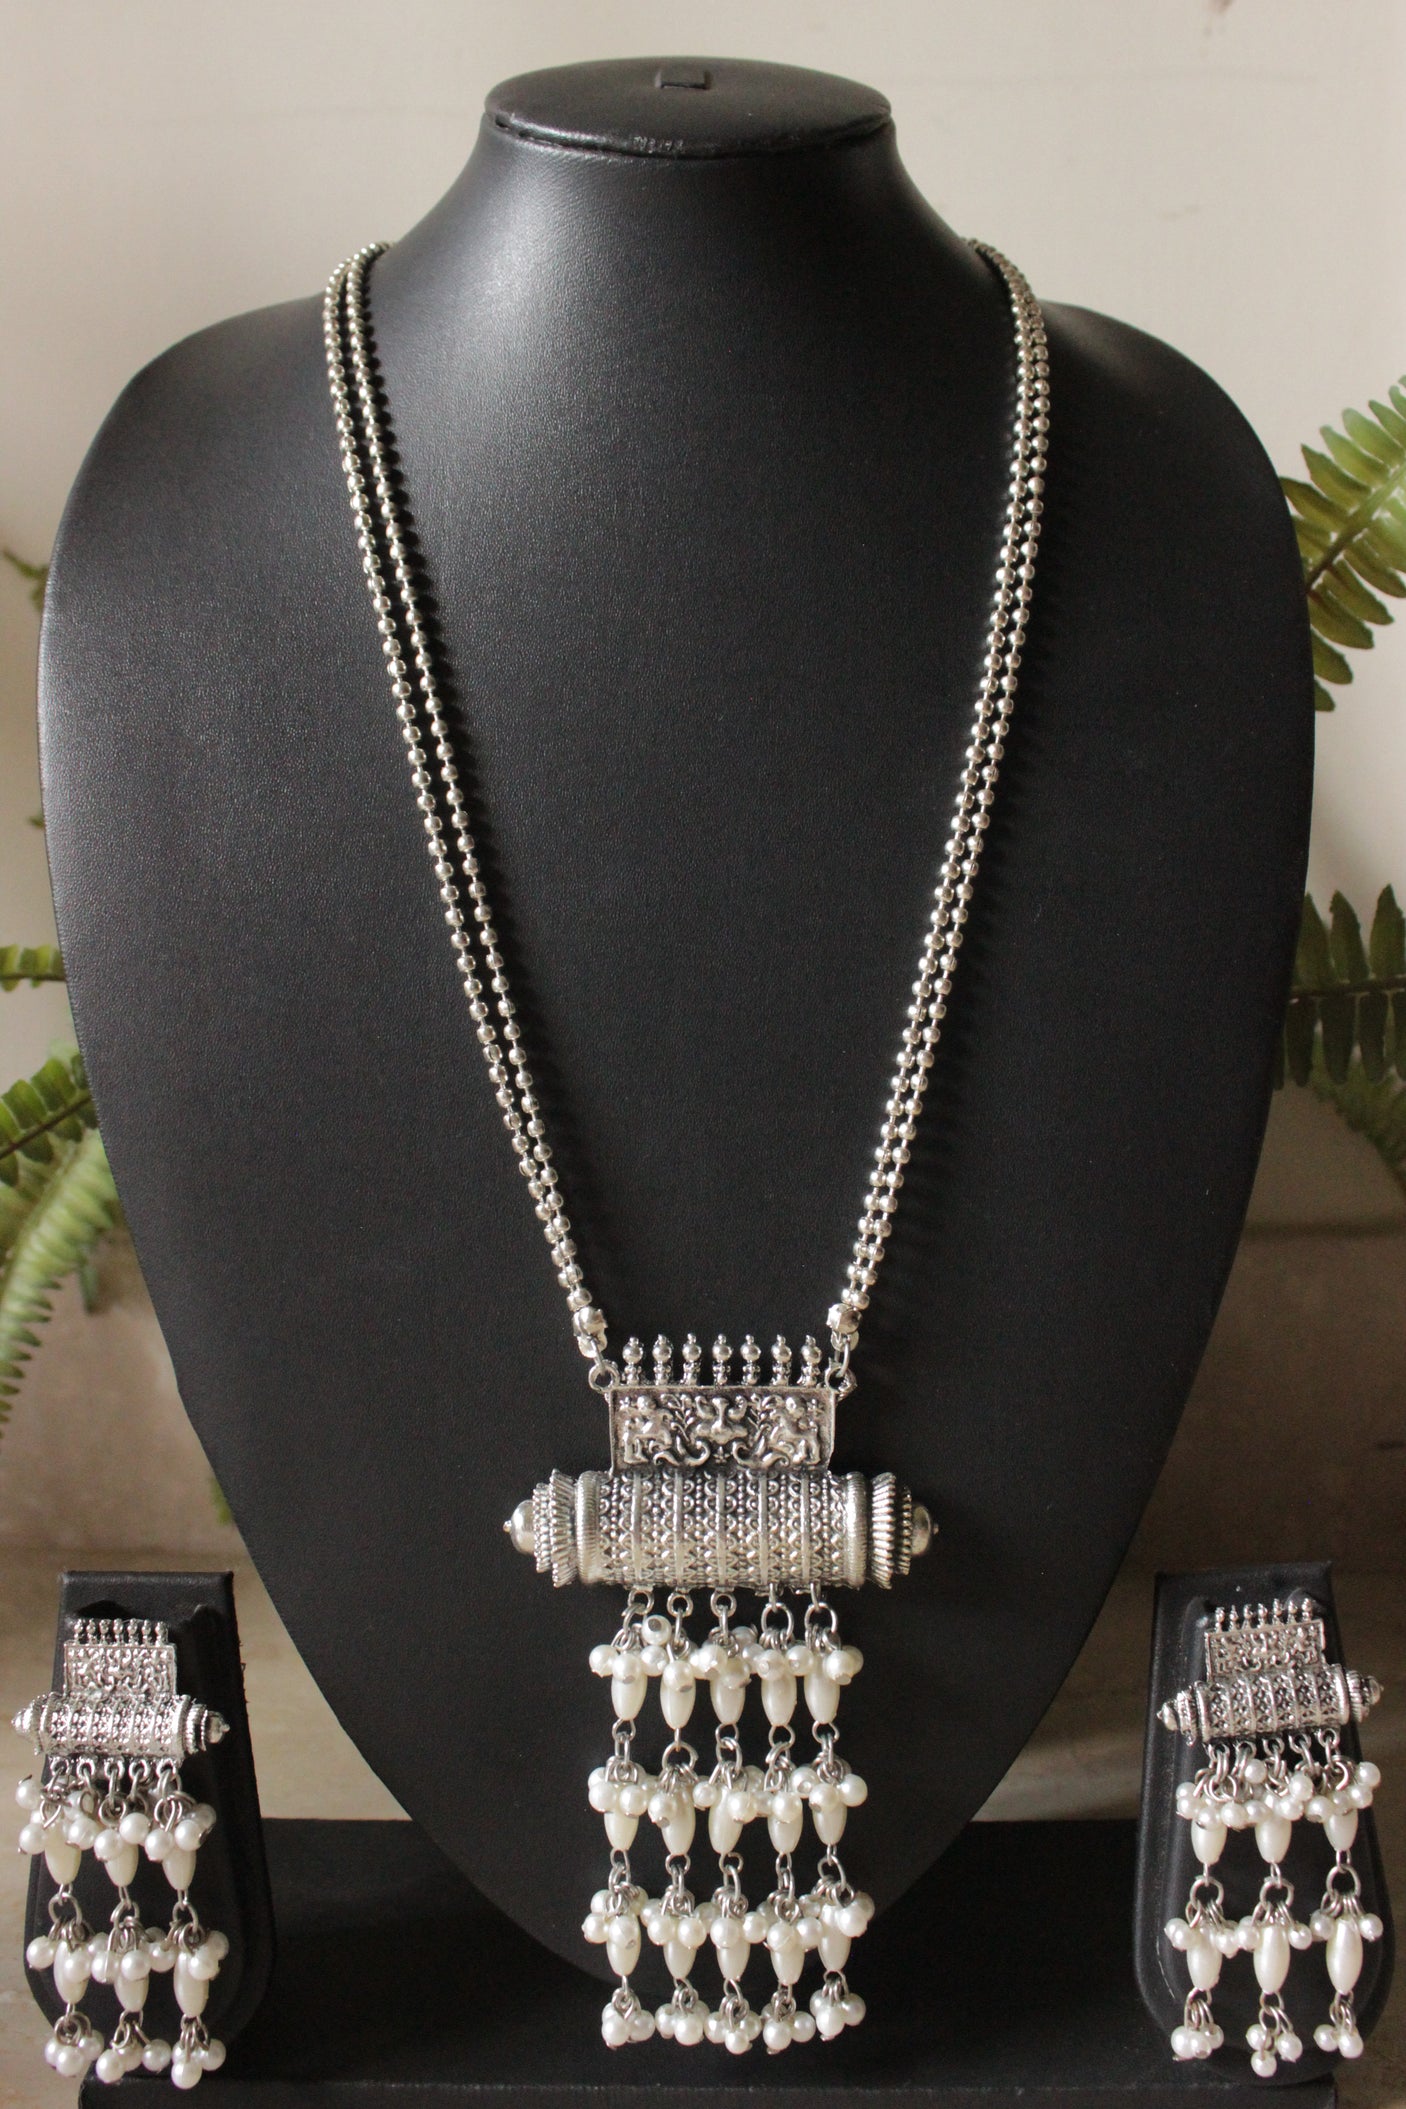 White Beads Embellished Silver Finish 2 Layer Chain Necklace Set